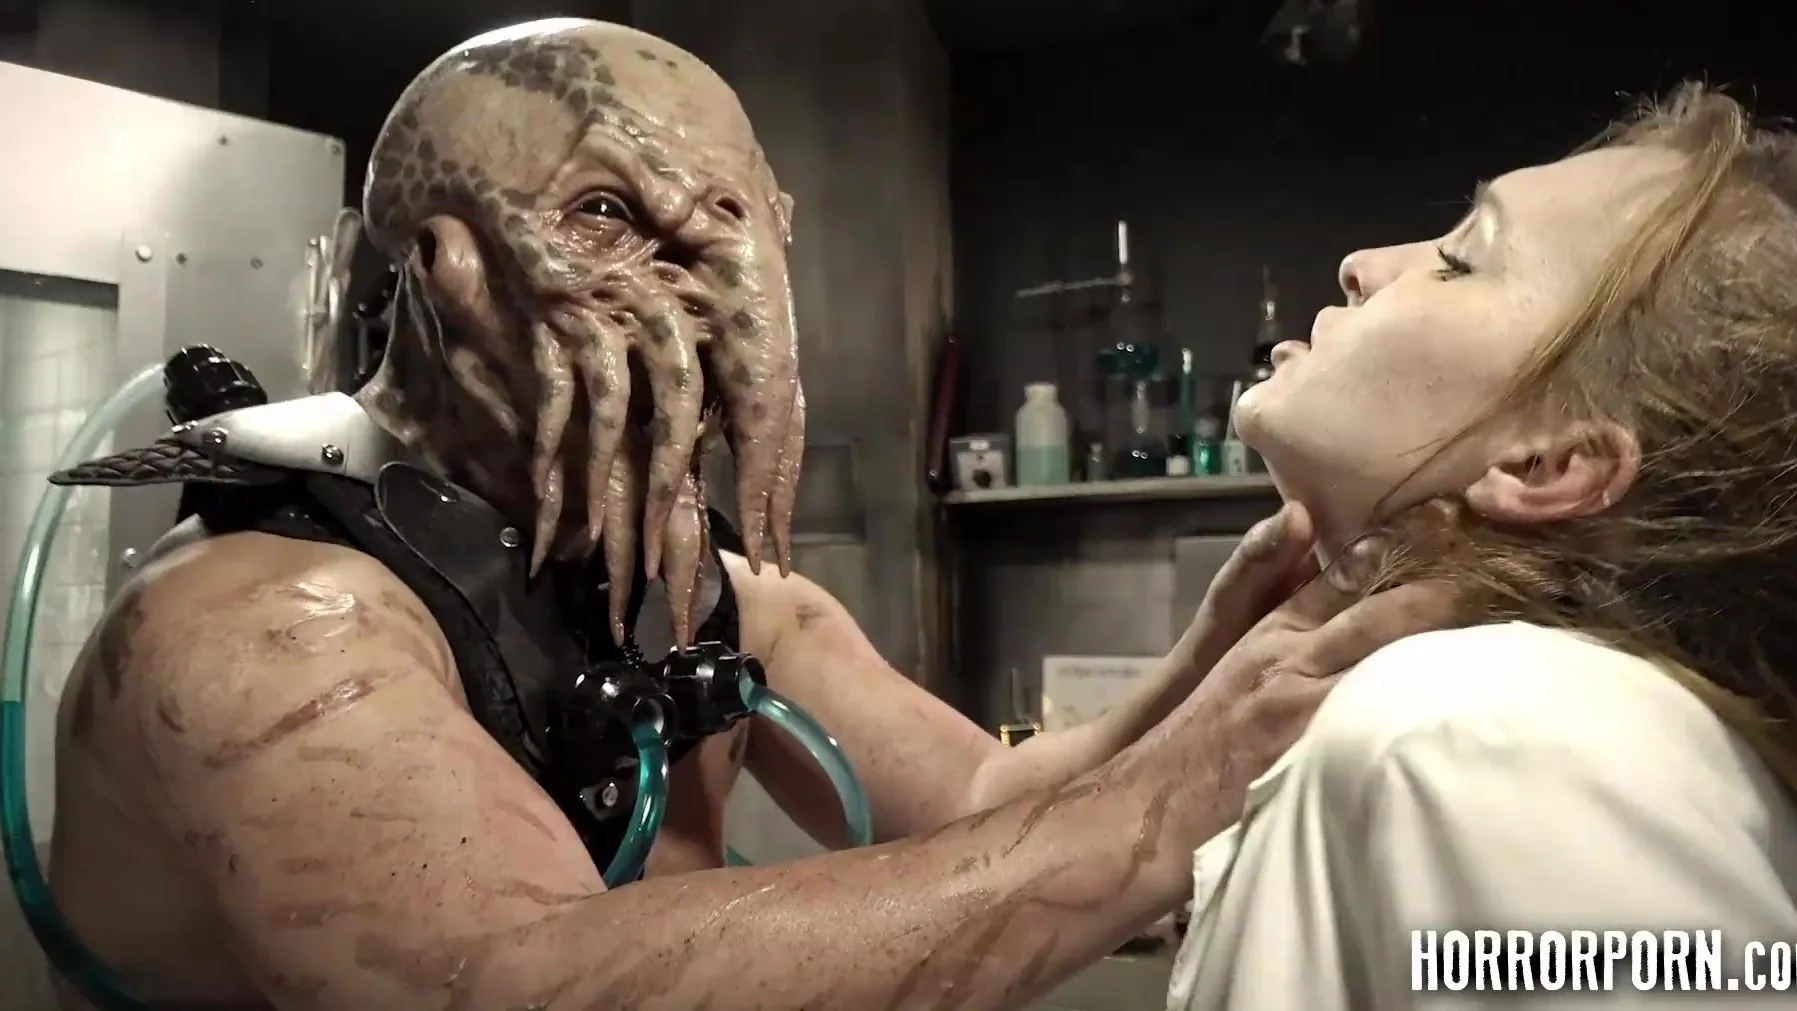 Horror Porn Movie Resurrected Cthulhu With Erected Dick Fucks Beautiful Seductive Doctor Bell Claire